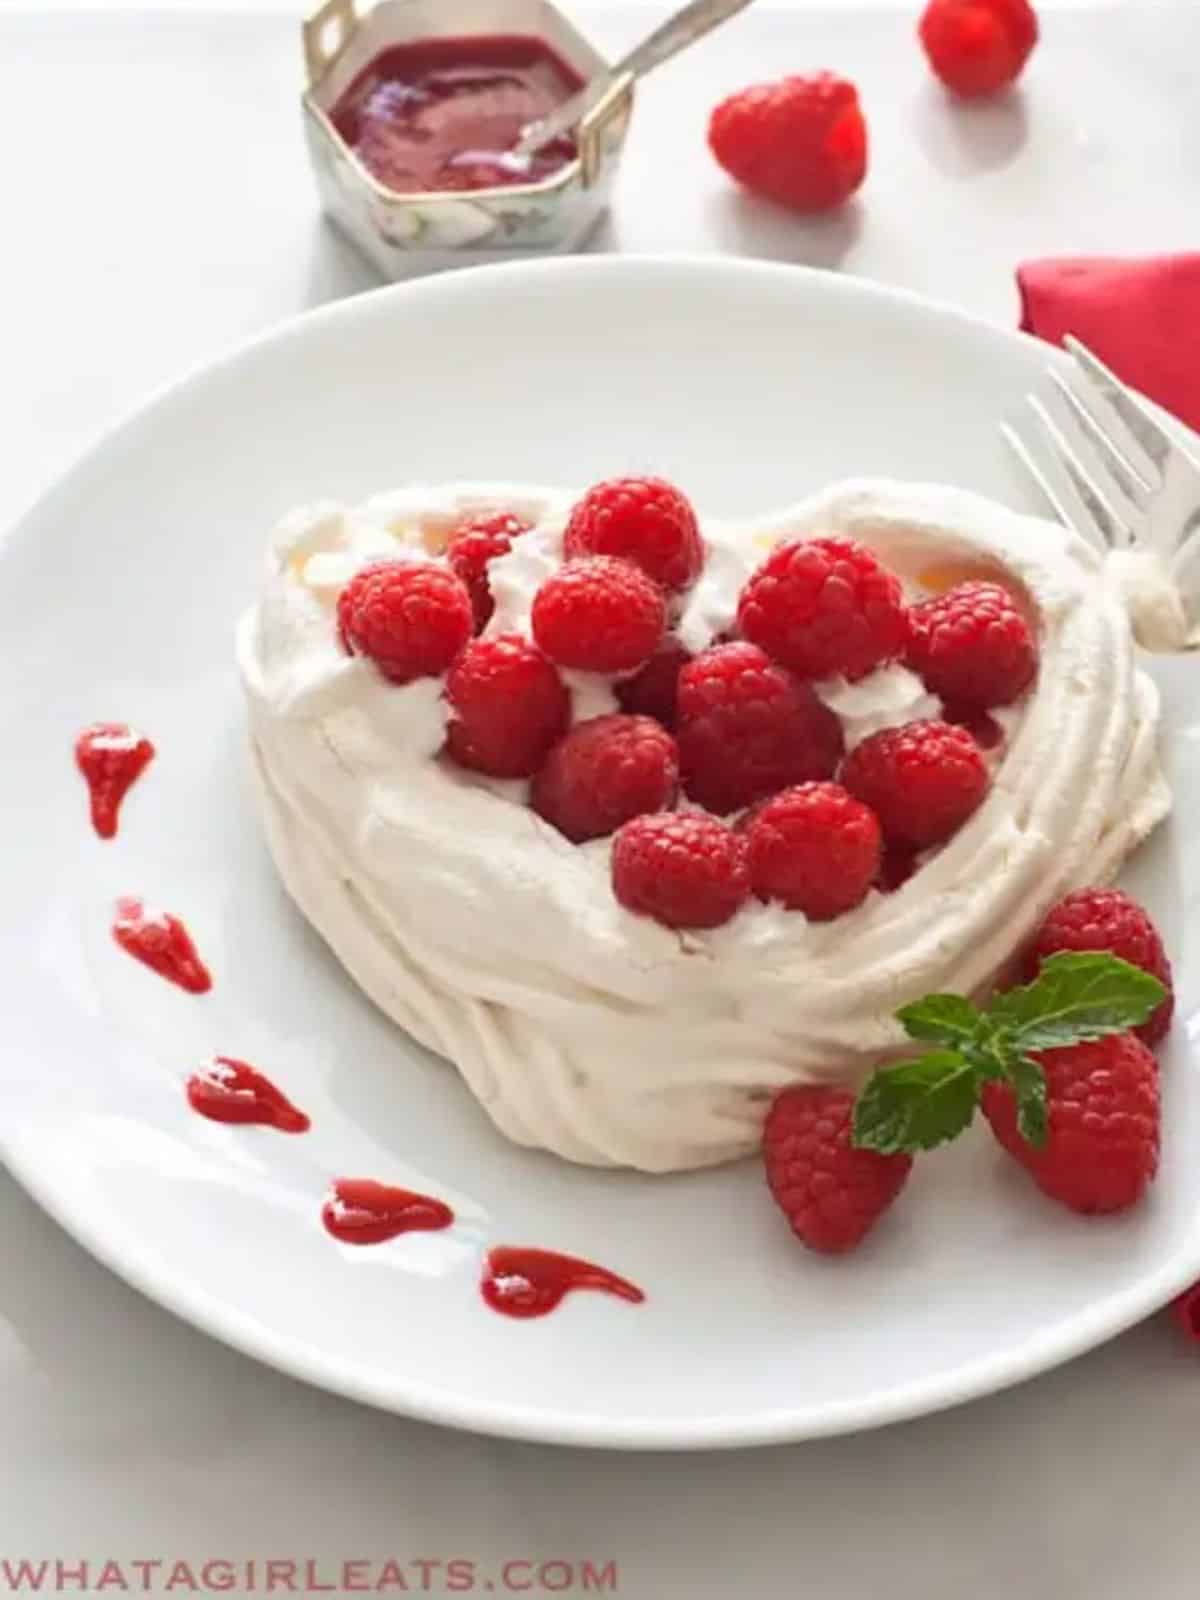 Beauitful white Meringue heart topped with fresh Raspberries